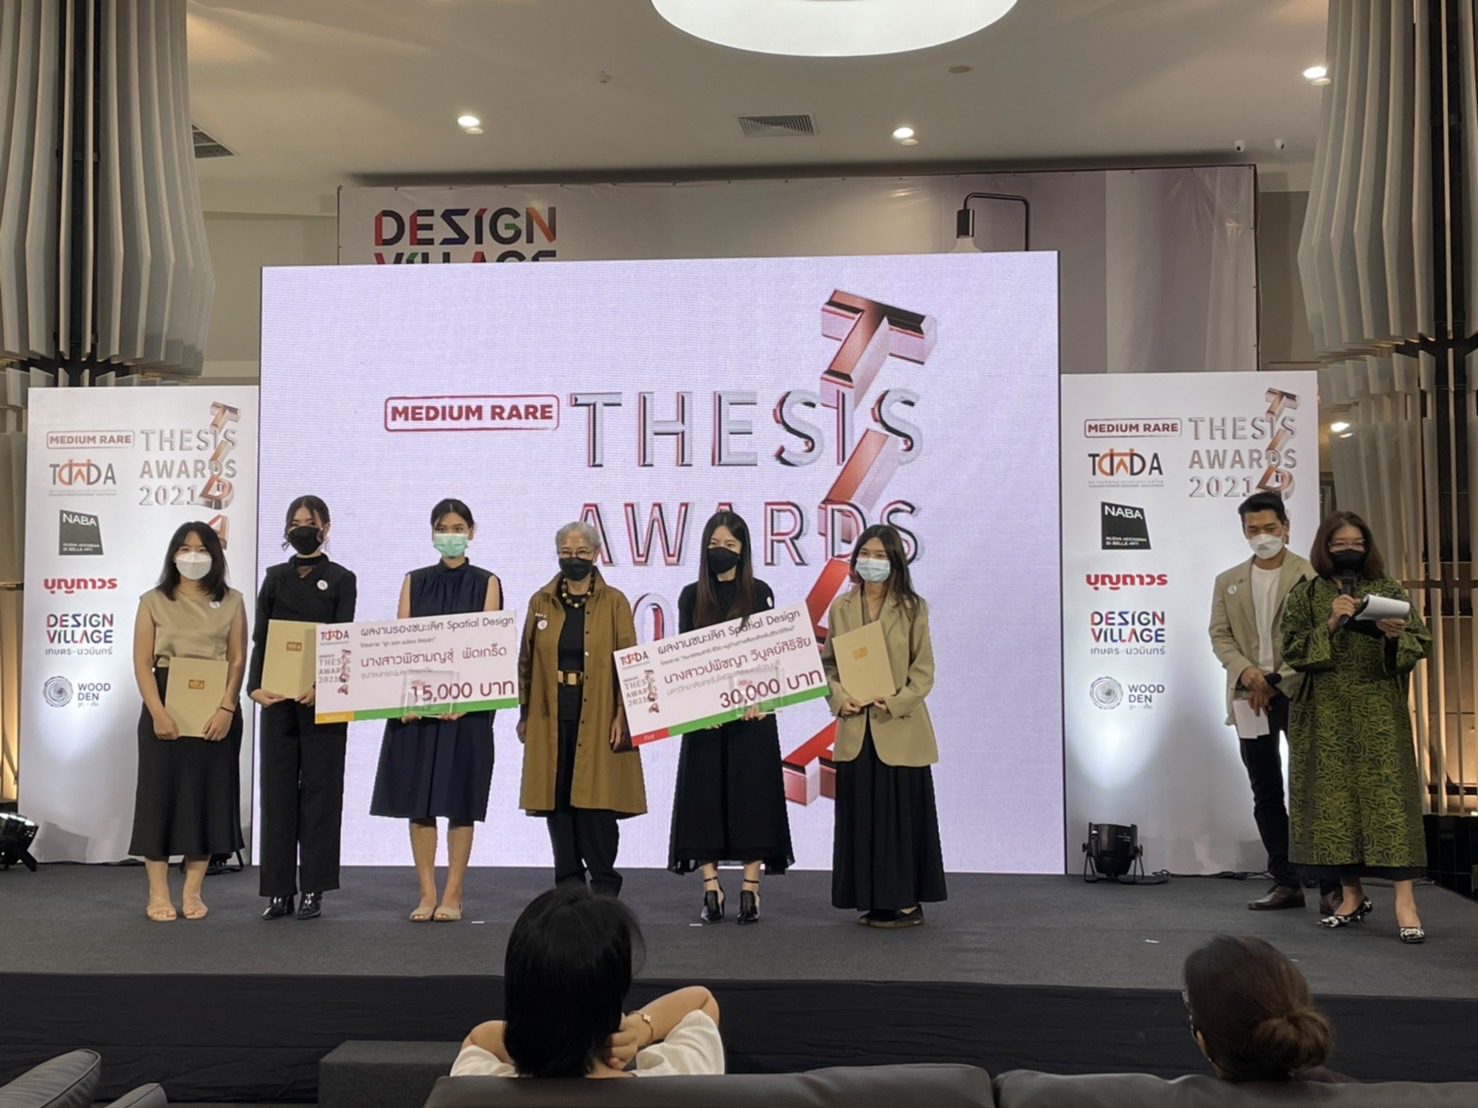 TIDA THESIS AWARDS 2021 SPATIAL DESIGN won by INA STUDENT